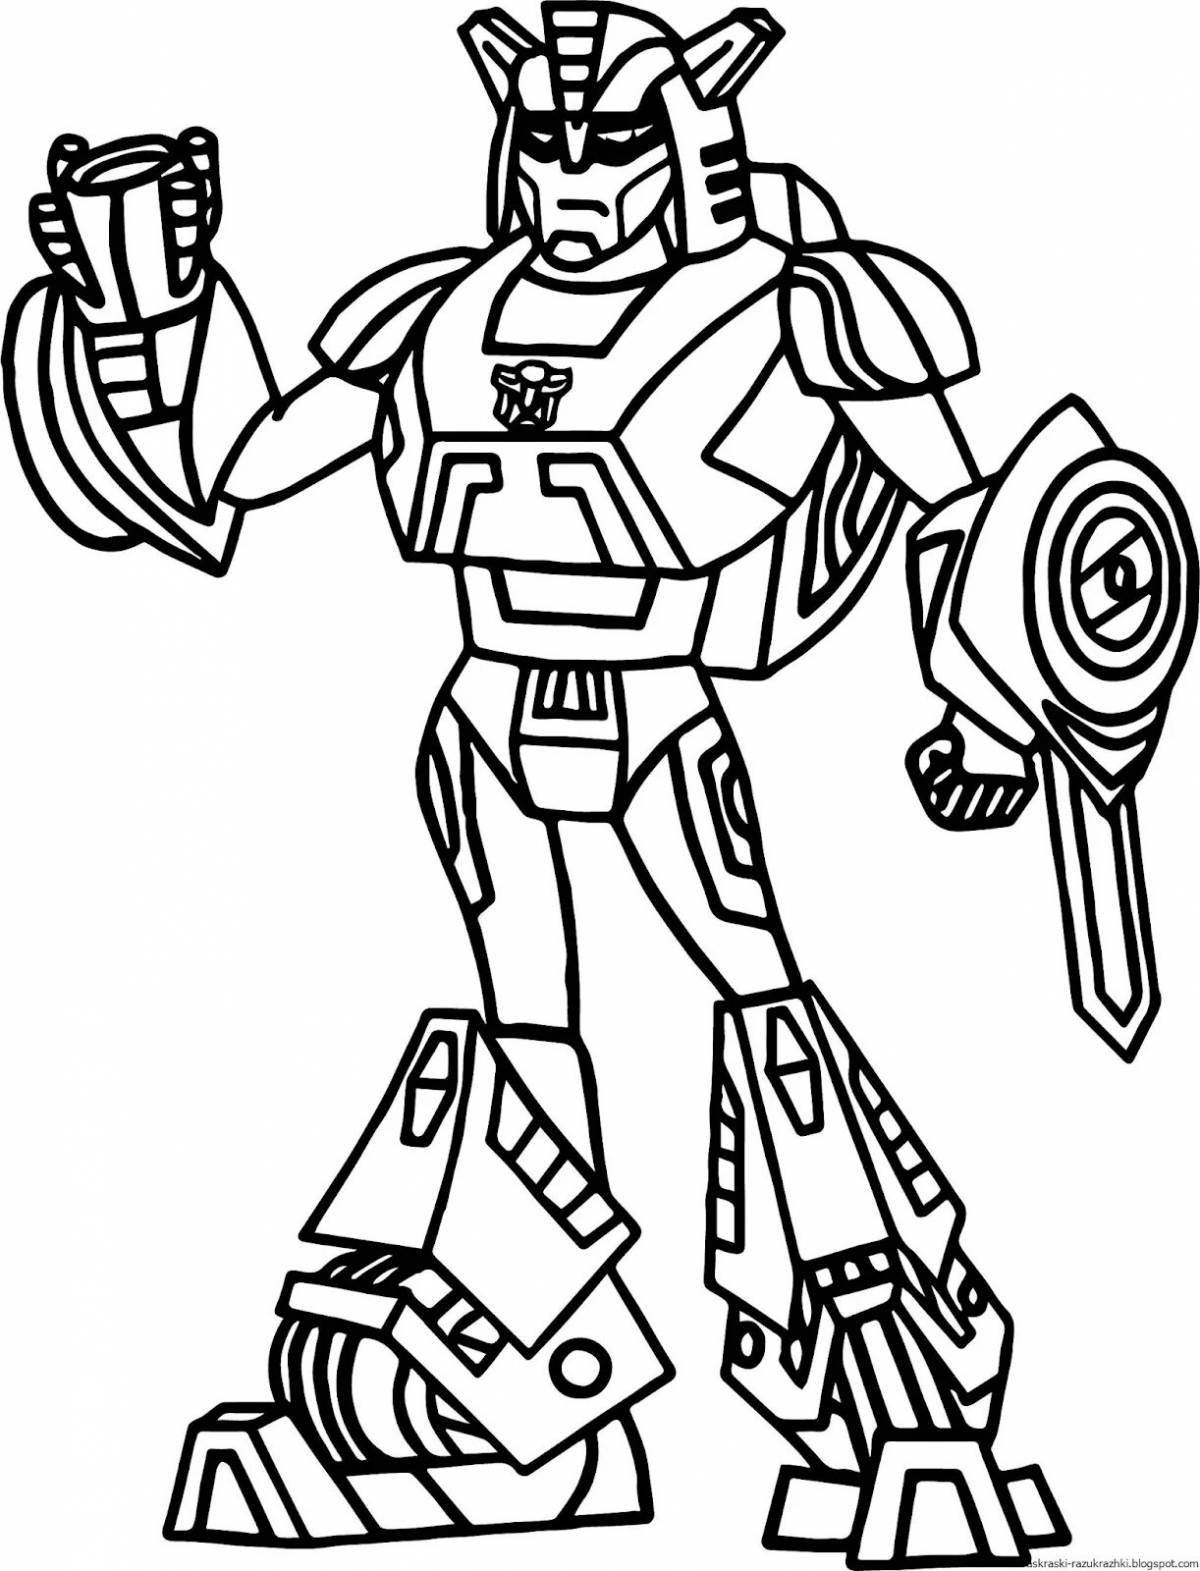 Creative robot coloring pages for 5-6 year old boys